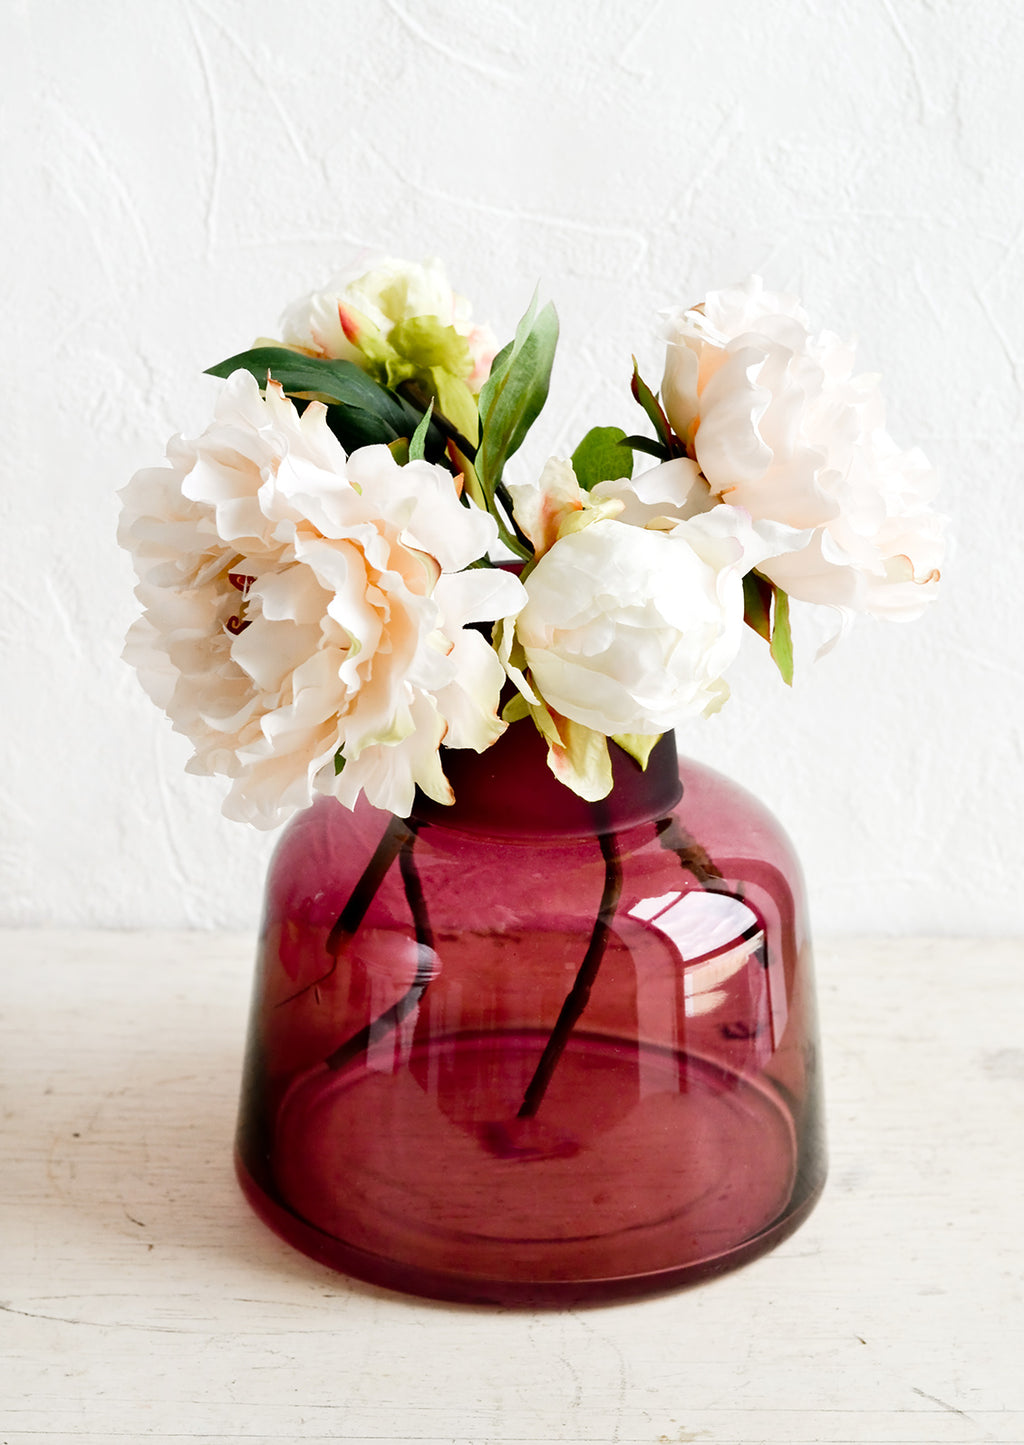 1: A berry colored glass vase with peonies.